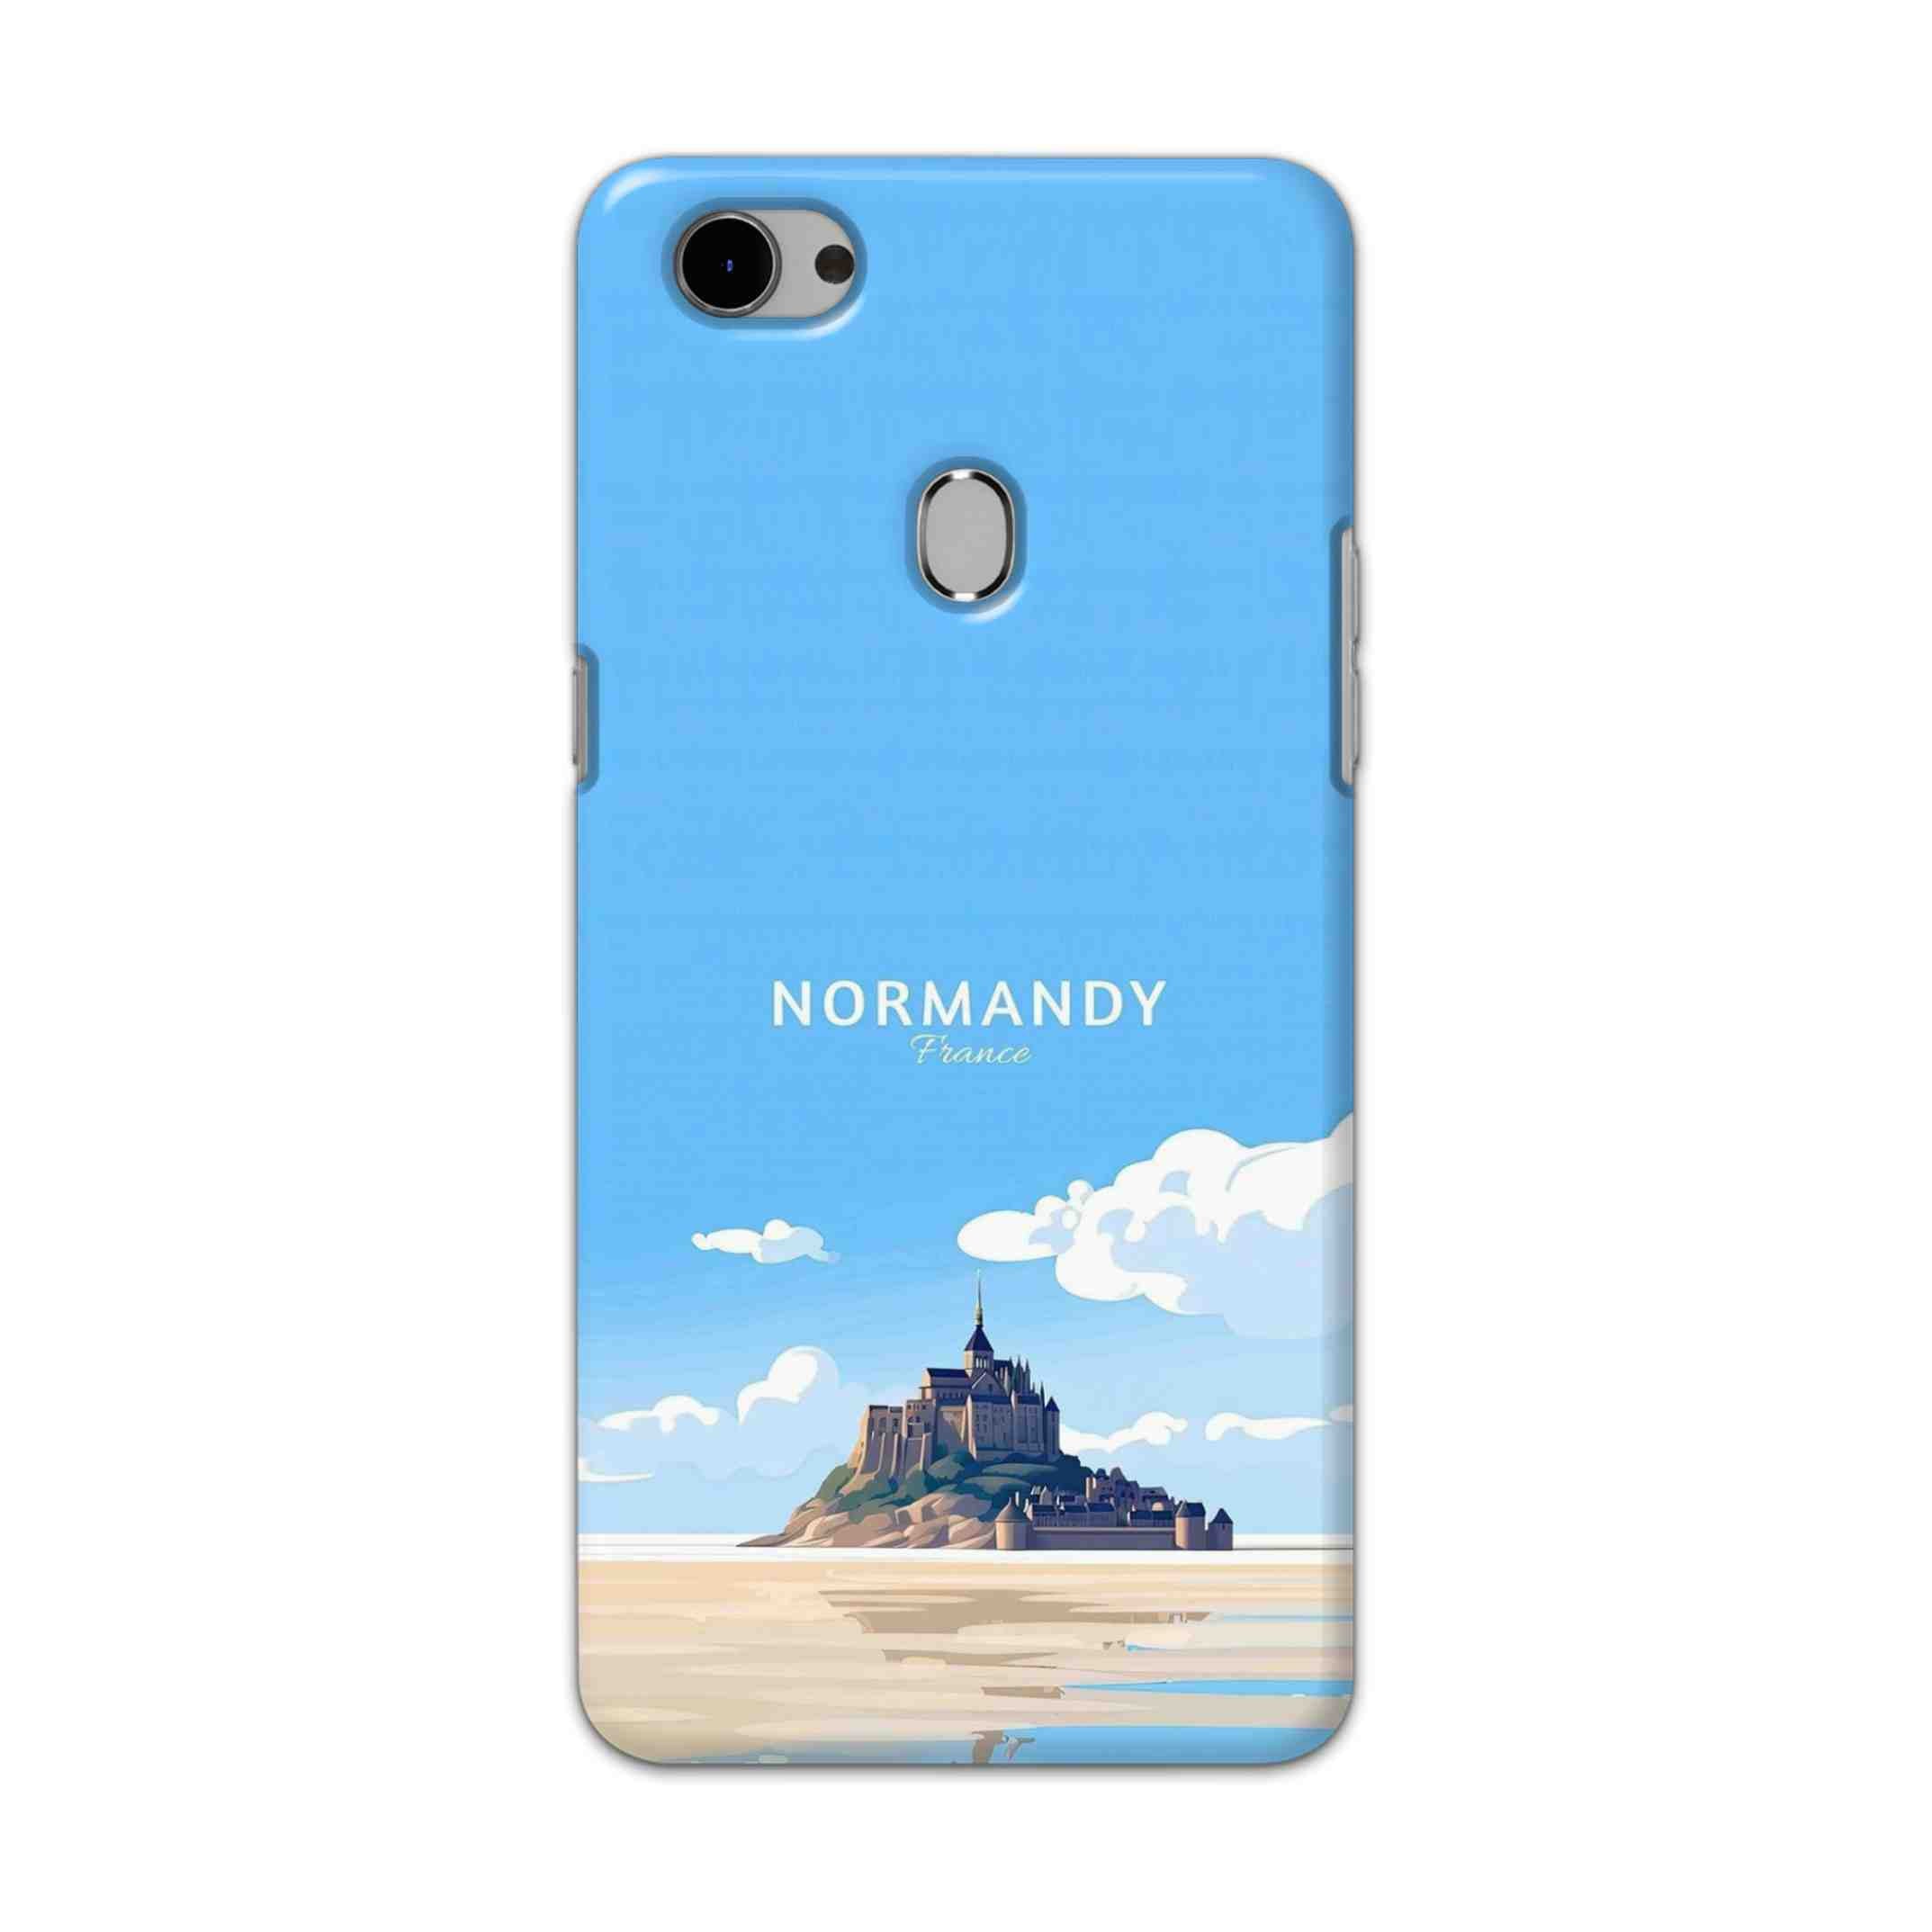 Buy Normandy Hard Back Mobile Phone Case Cover For Oppo F7 Online